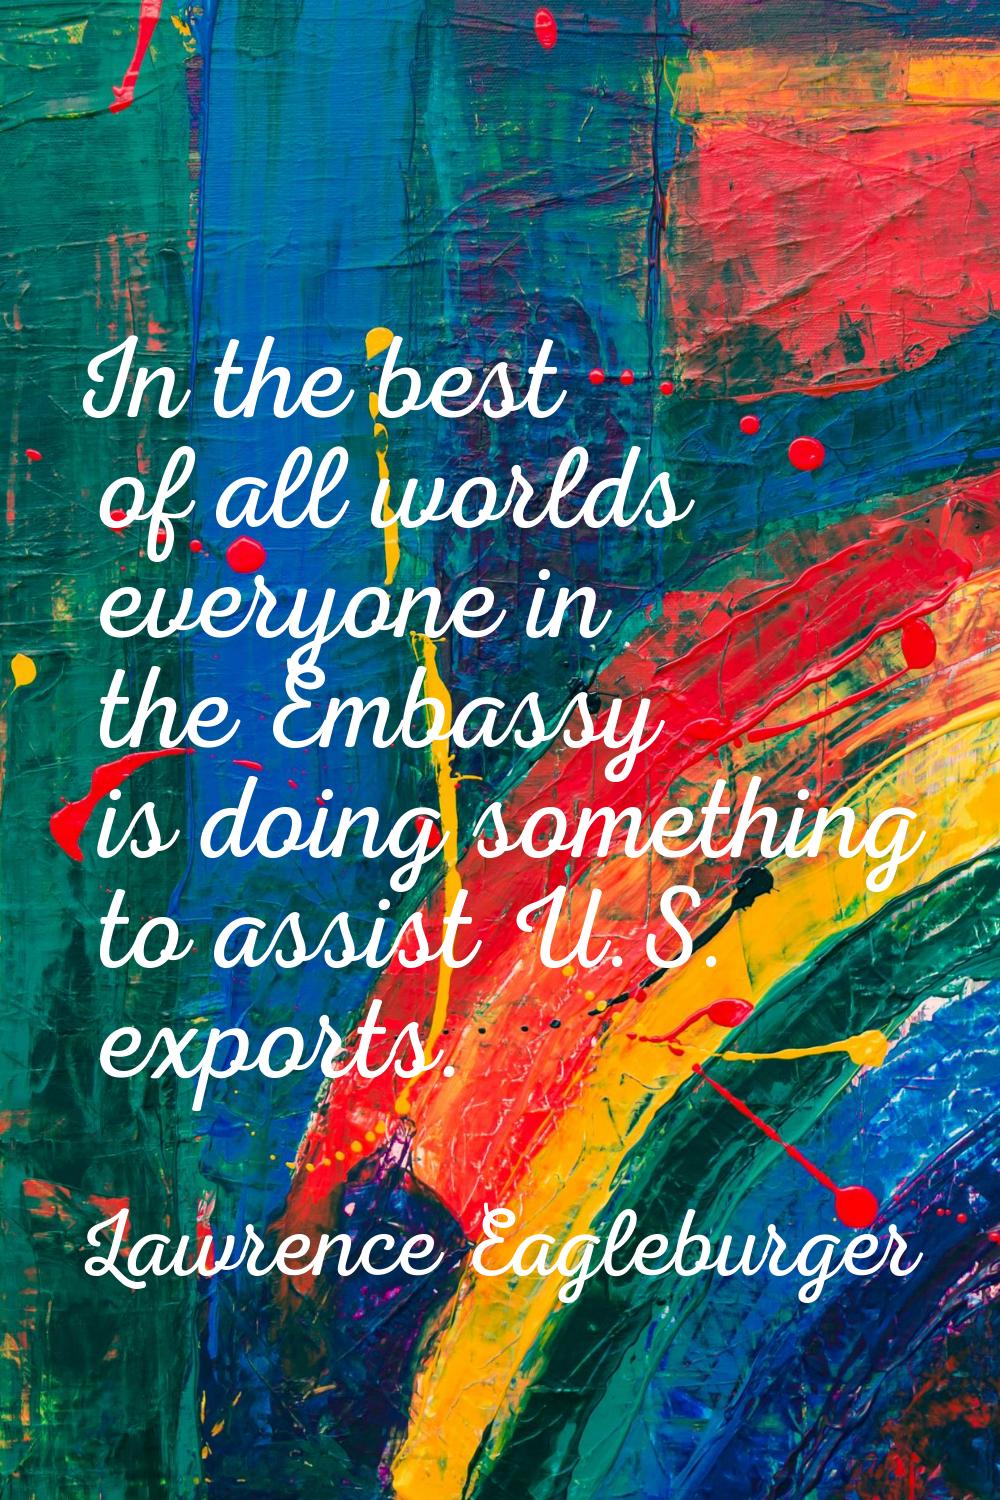 In the best of all worlds everyone in the Embassy is doing something to assist U.S. exports.